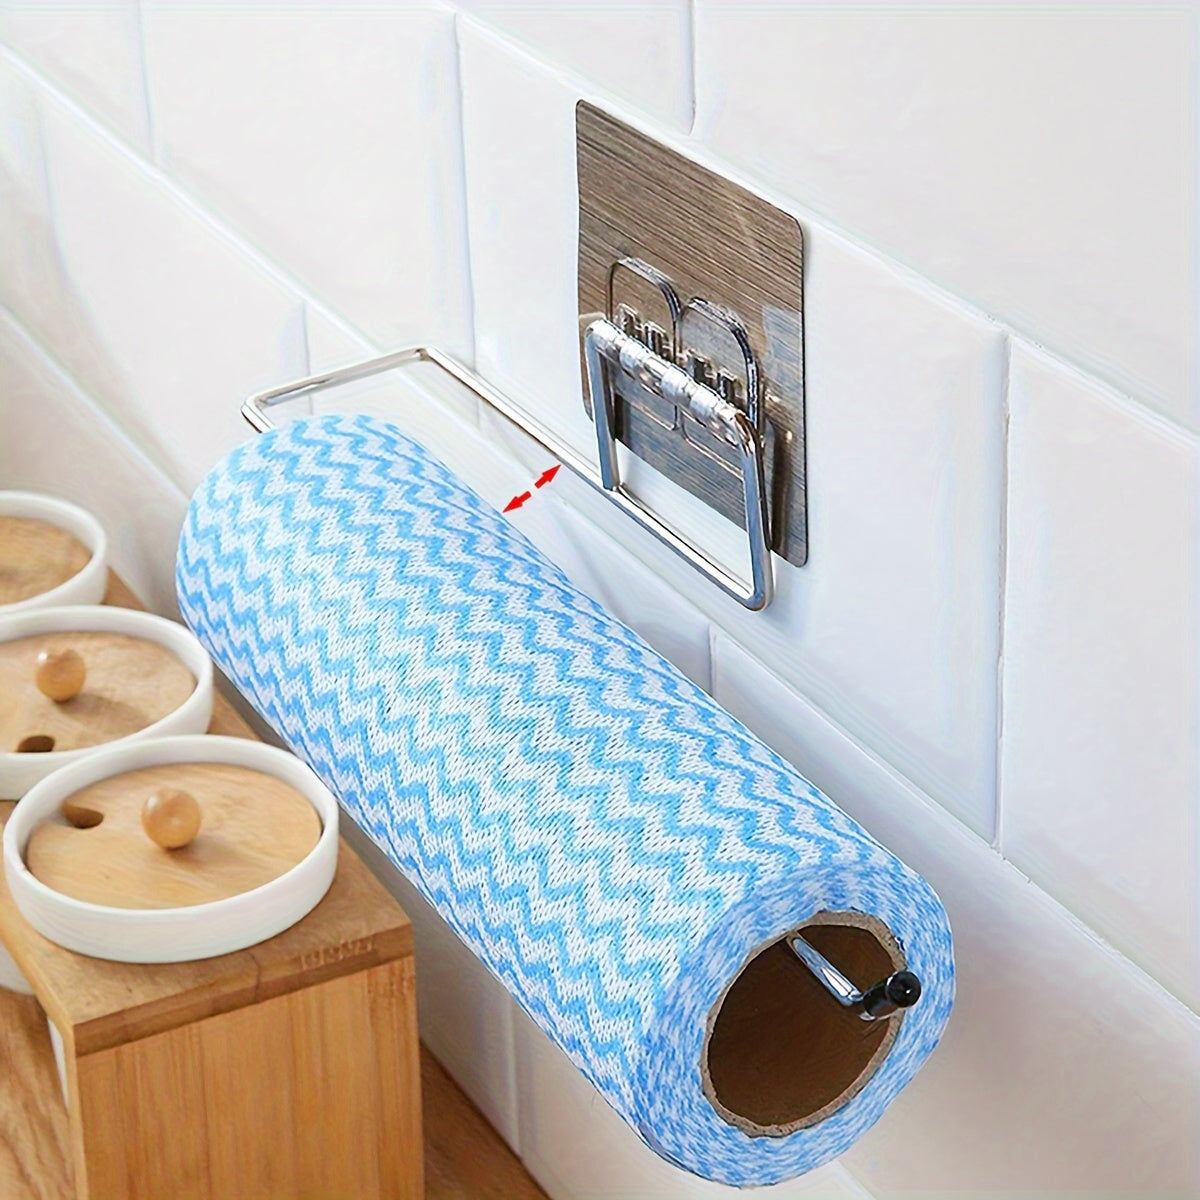 1pc Wall-mounted Punching-free Kitchen Paper Holder, Toilet Roll Paper Holder, Bathroom Paper Holder, Home Kitchen And Bathroom Accessories